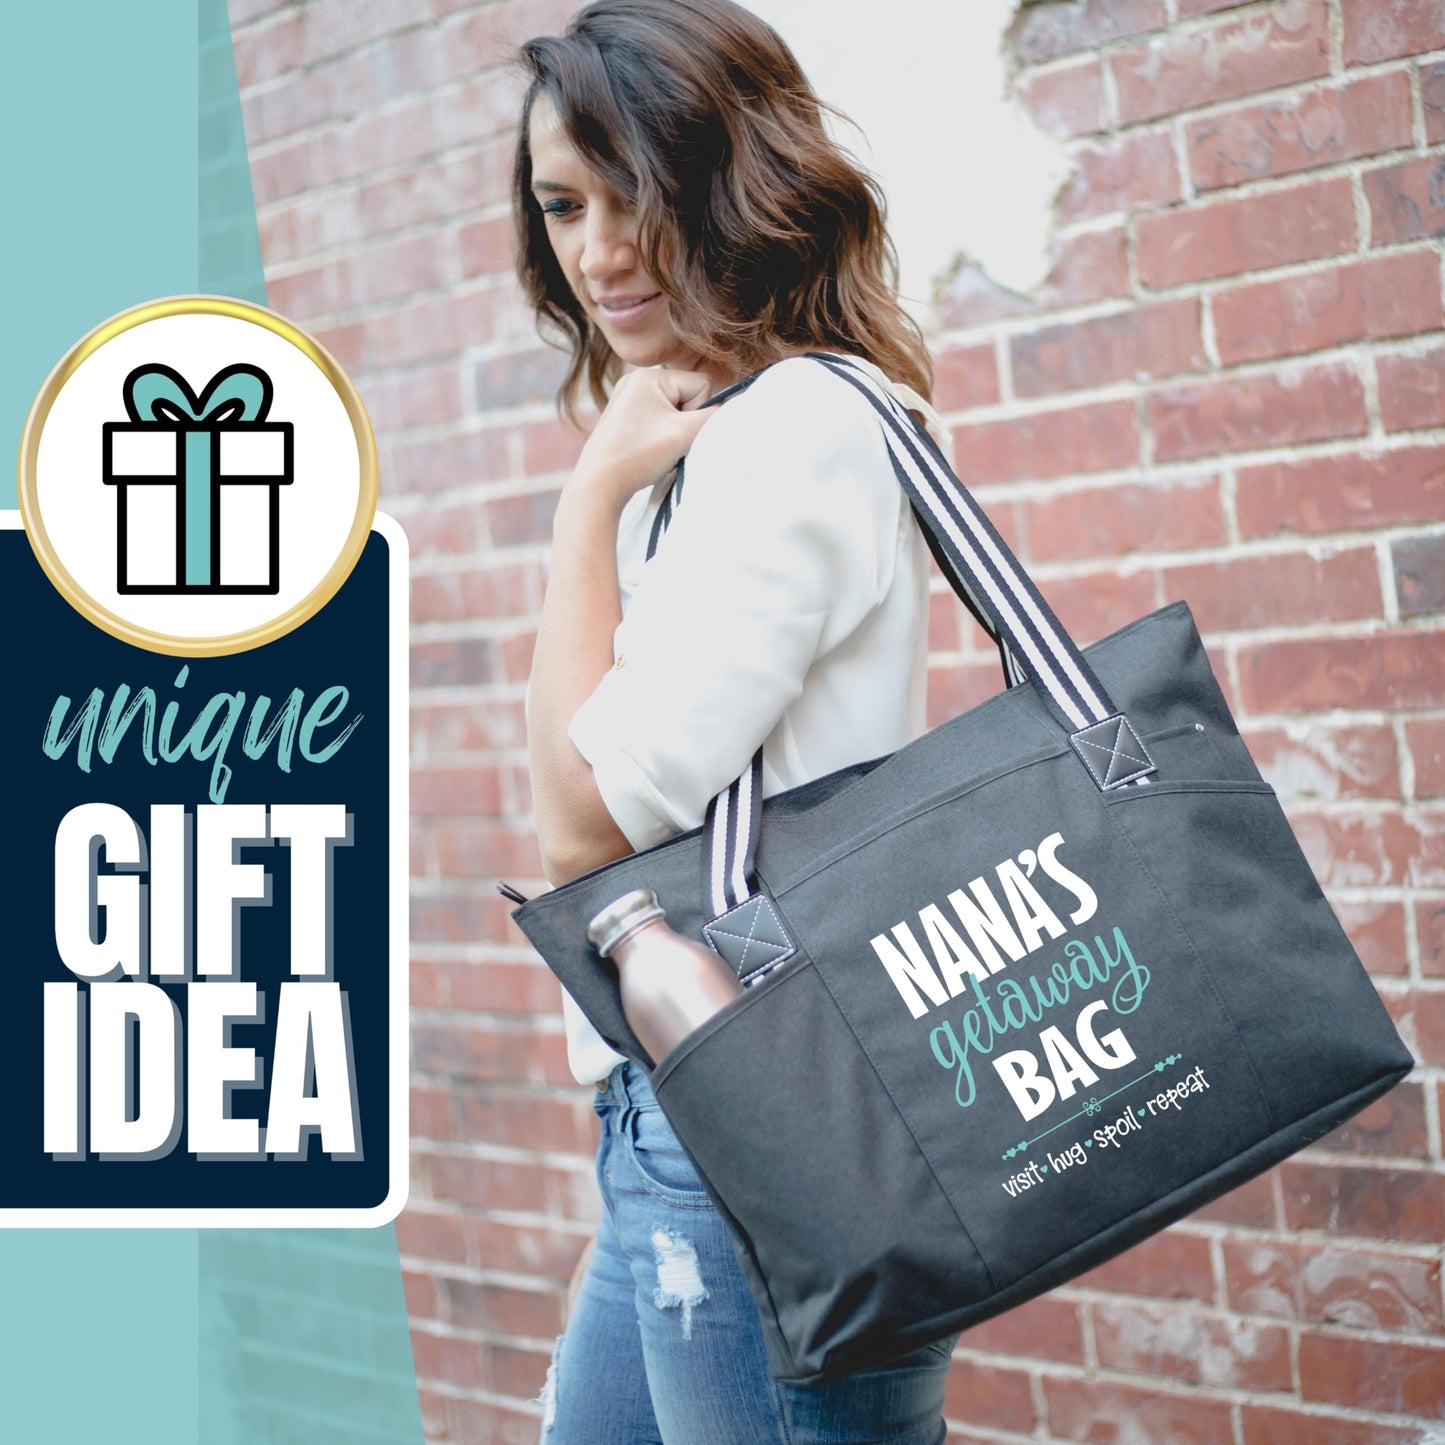 Brooke & Jess Designs Grandma Gifts, Nana Gifts Tote Bag - Perfect for Work, Gift for Granny, Mother's Day from Grandkids (Nana's Getaway Tessa Black)